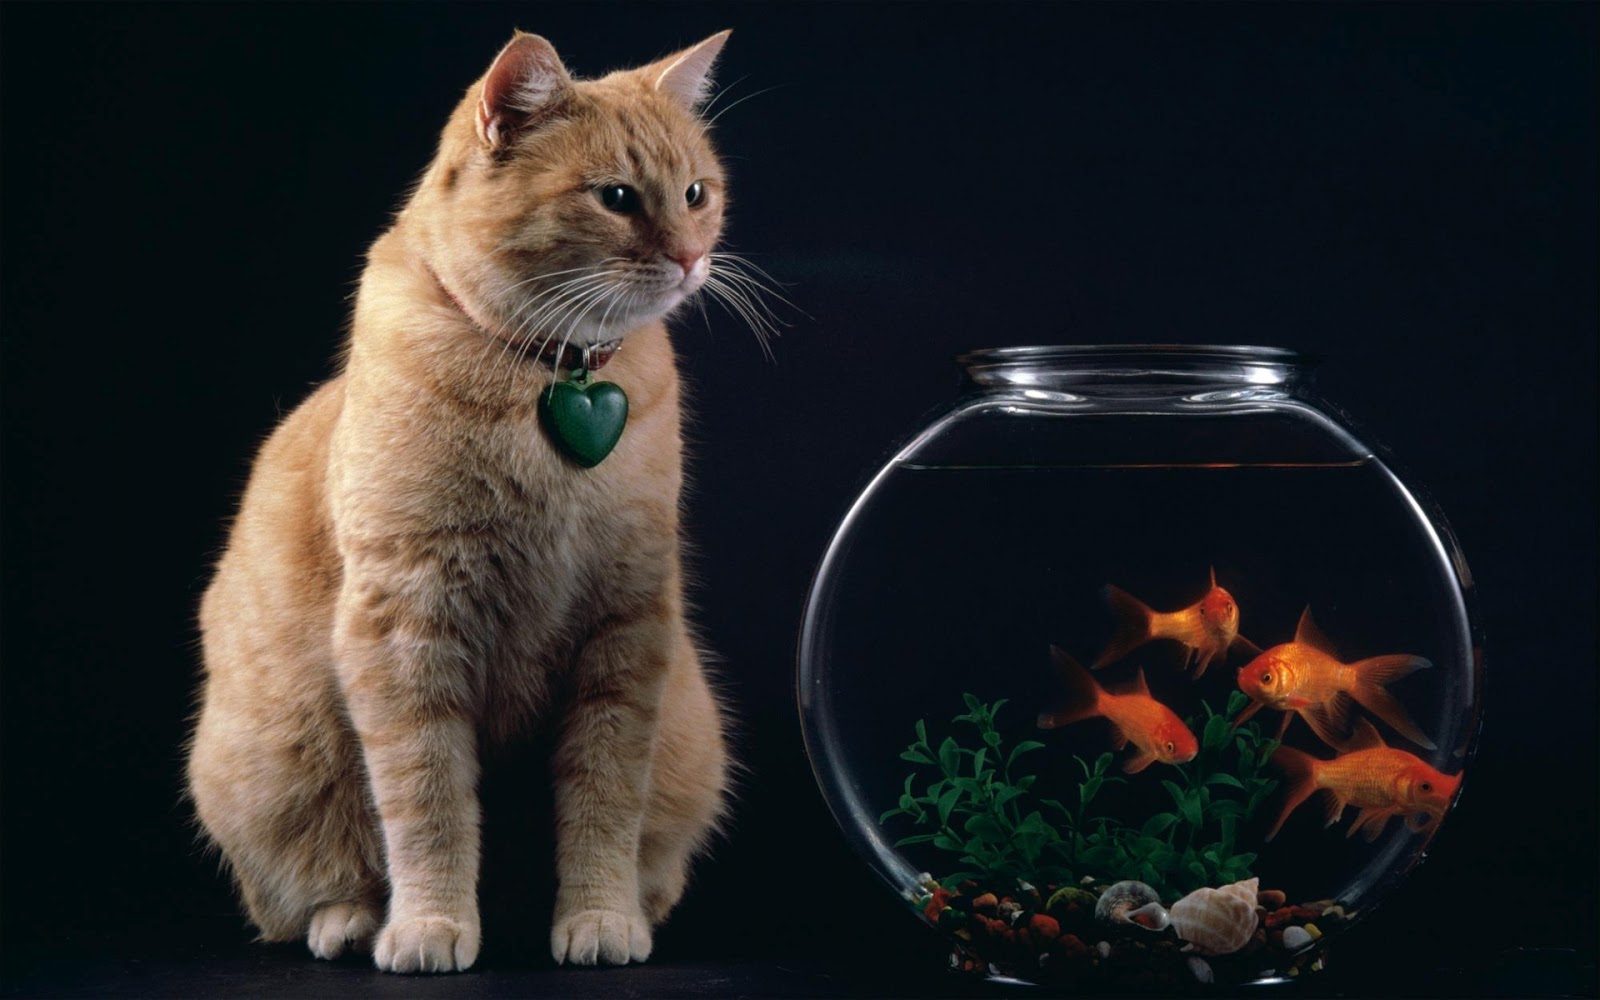  Cat and fish wallpaper amazing cat wallpapers kitty cat and fish 1600x1000